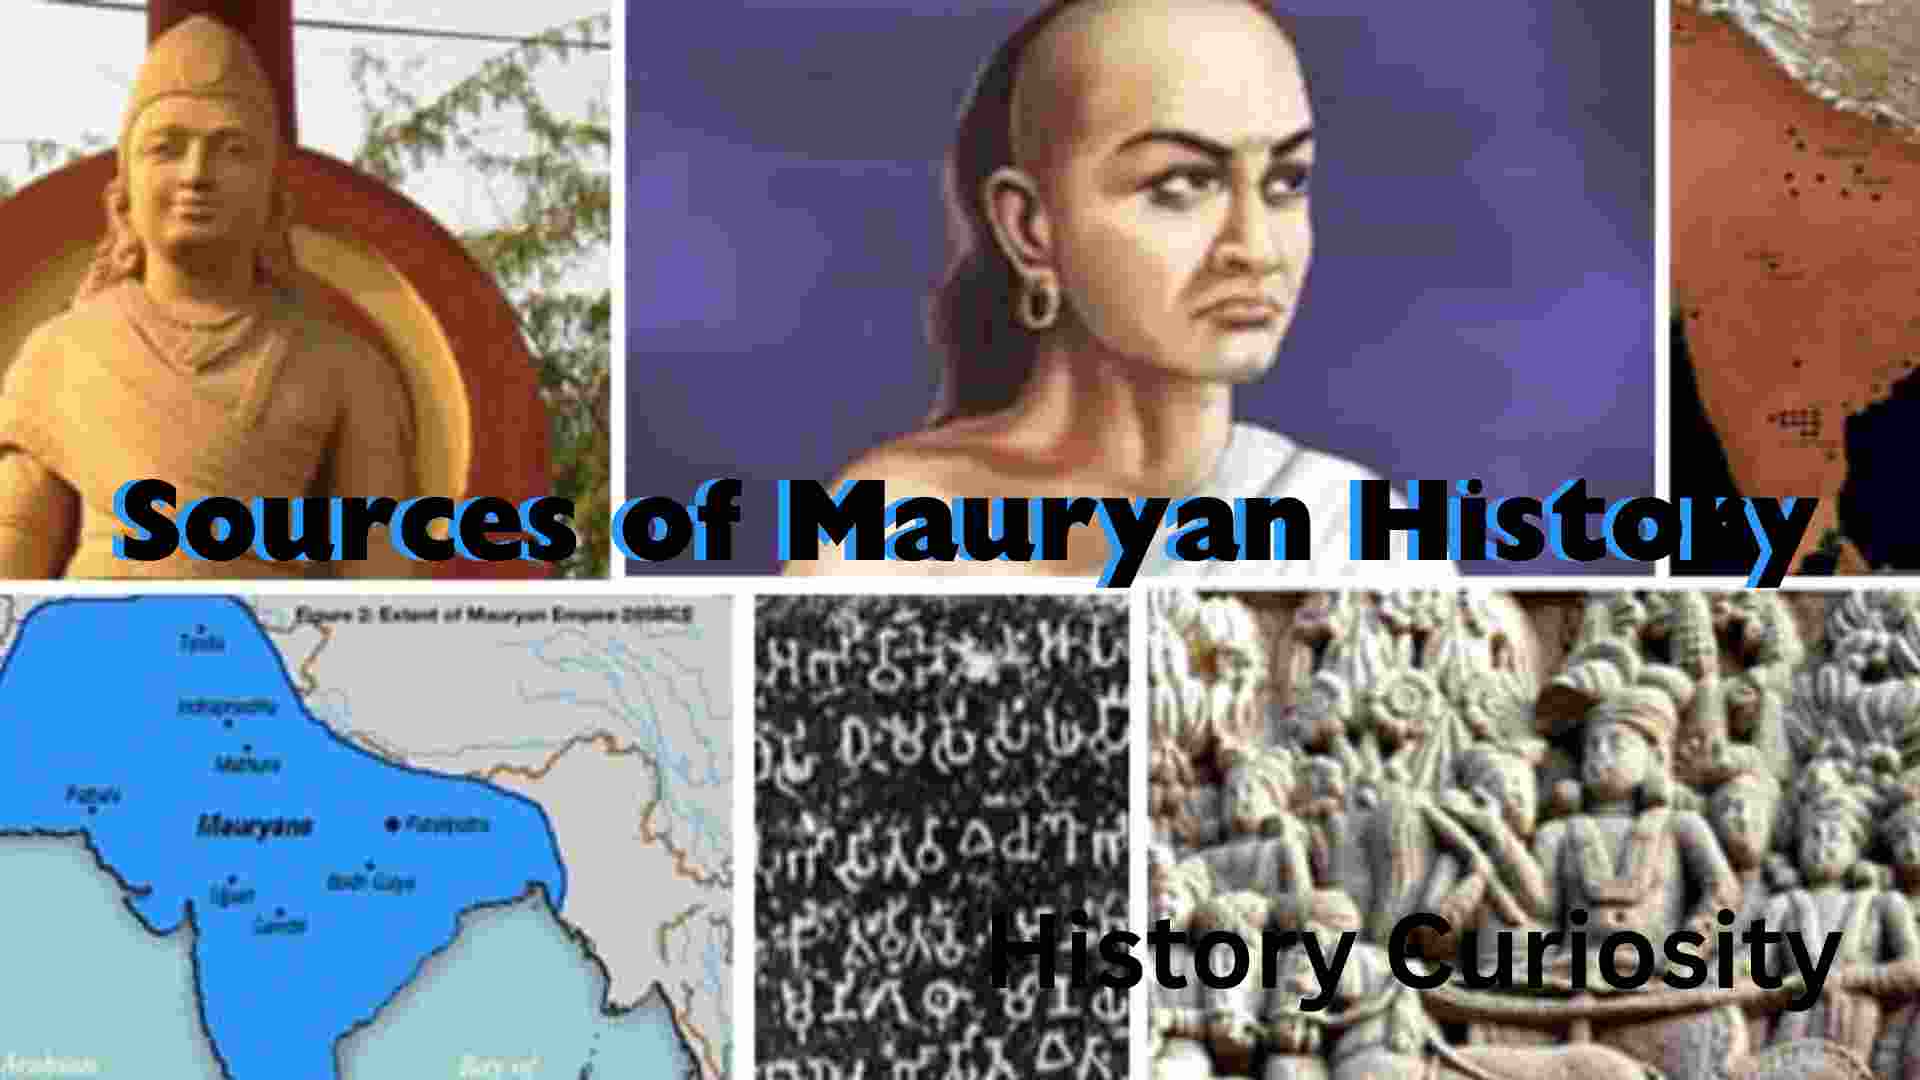 Sources of Mauryan History